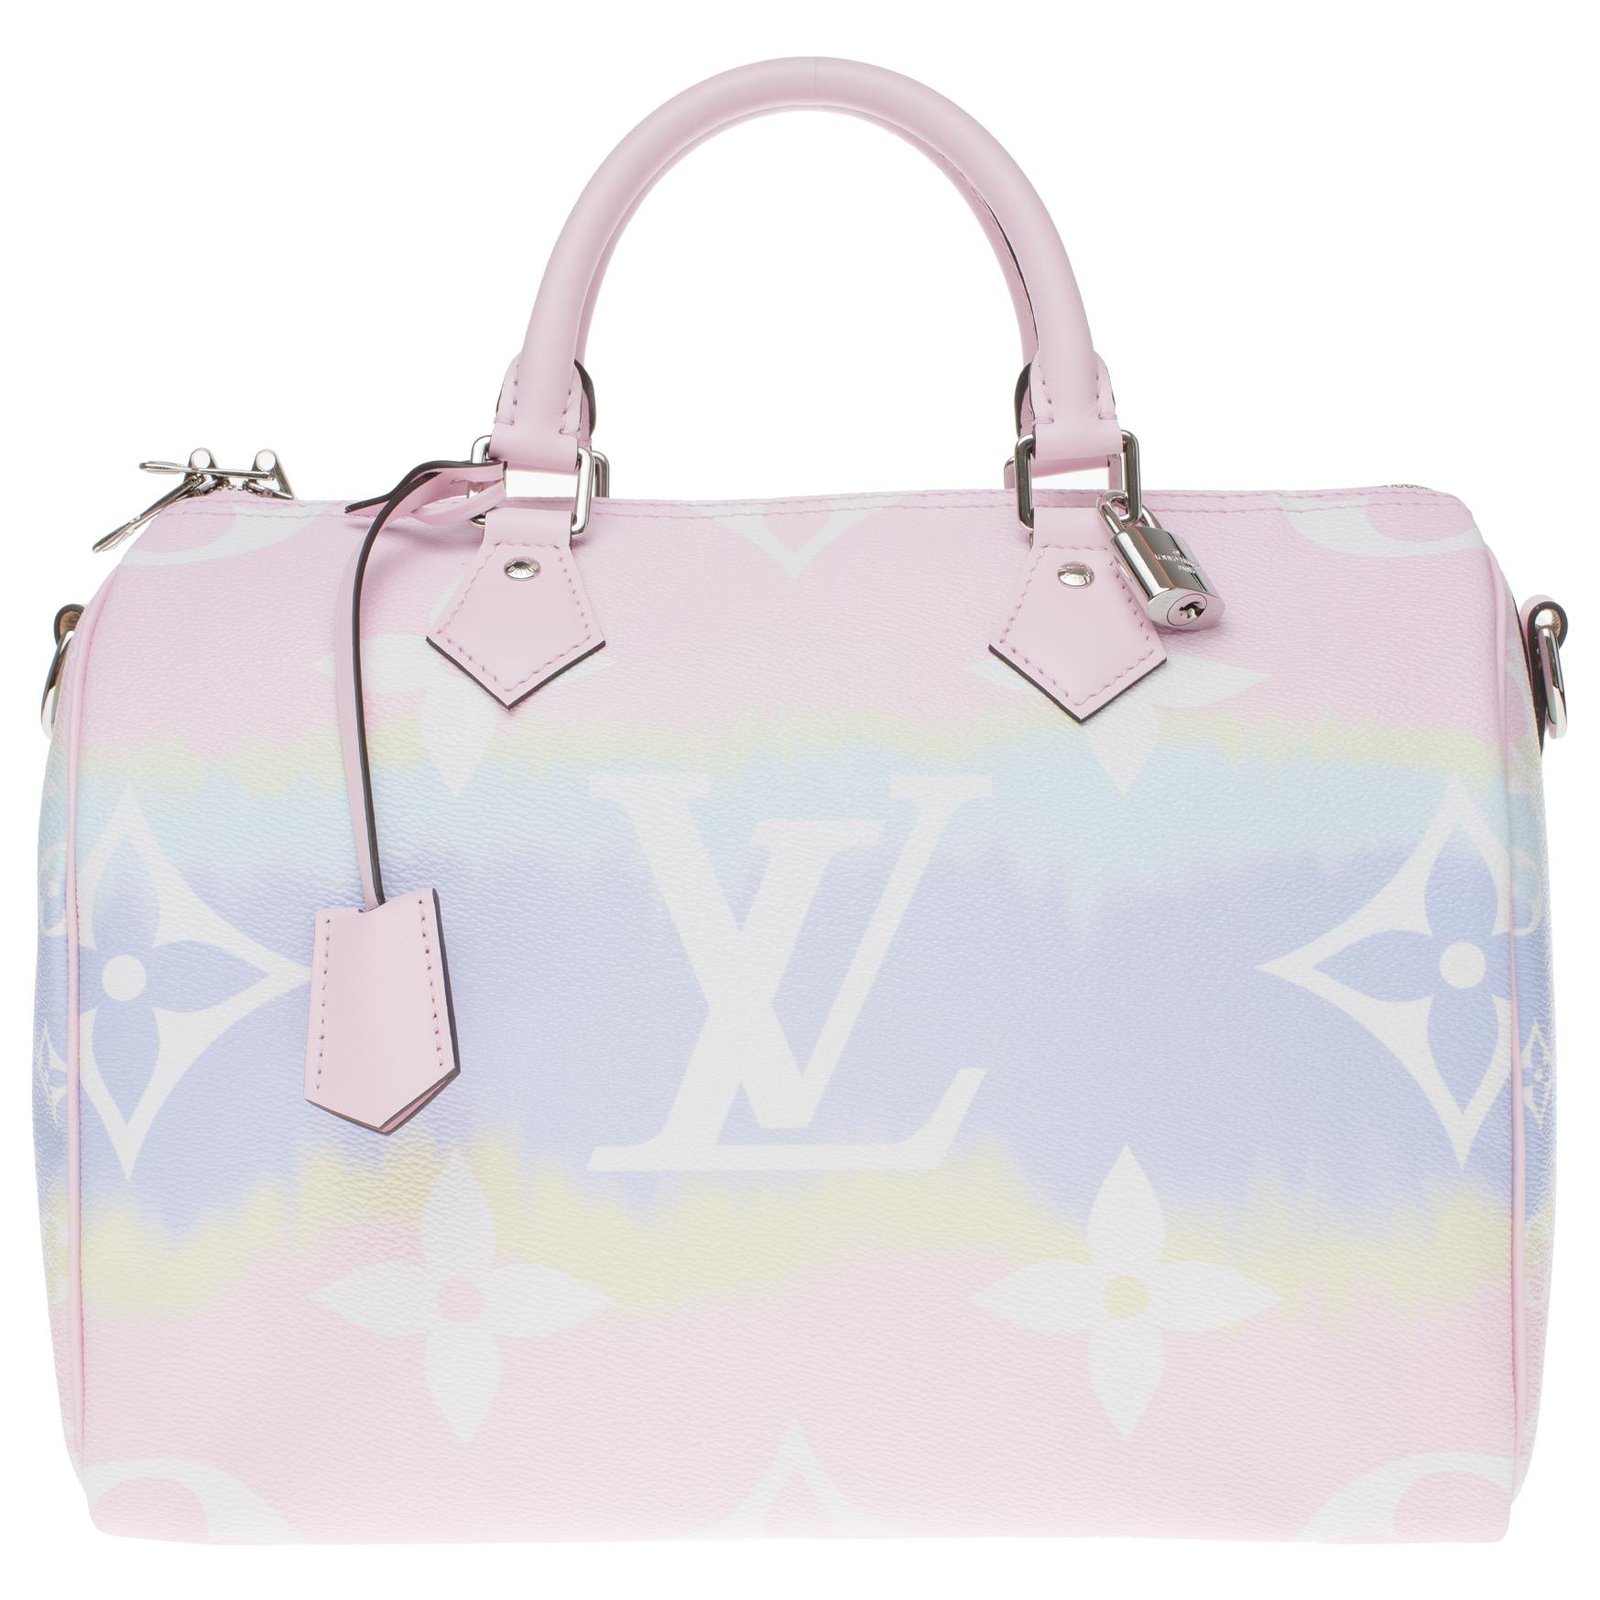 limited edition louis vuitton pink bag